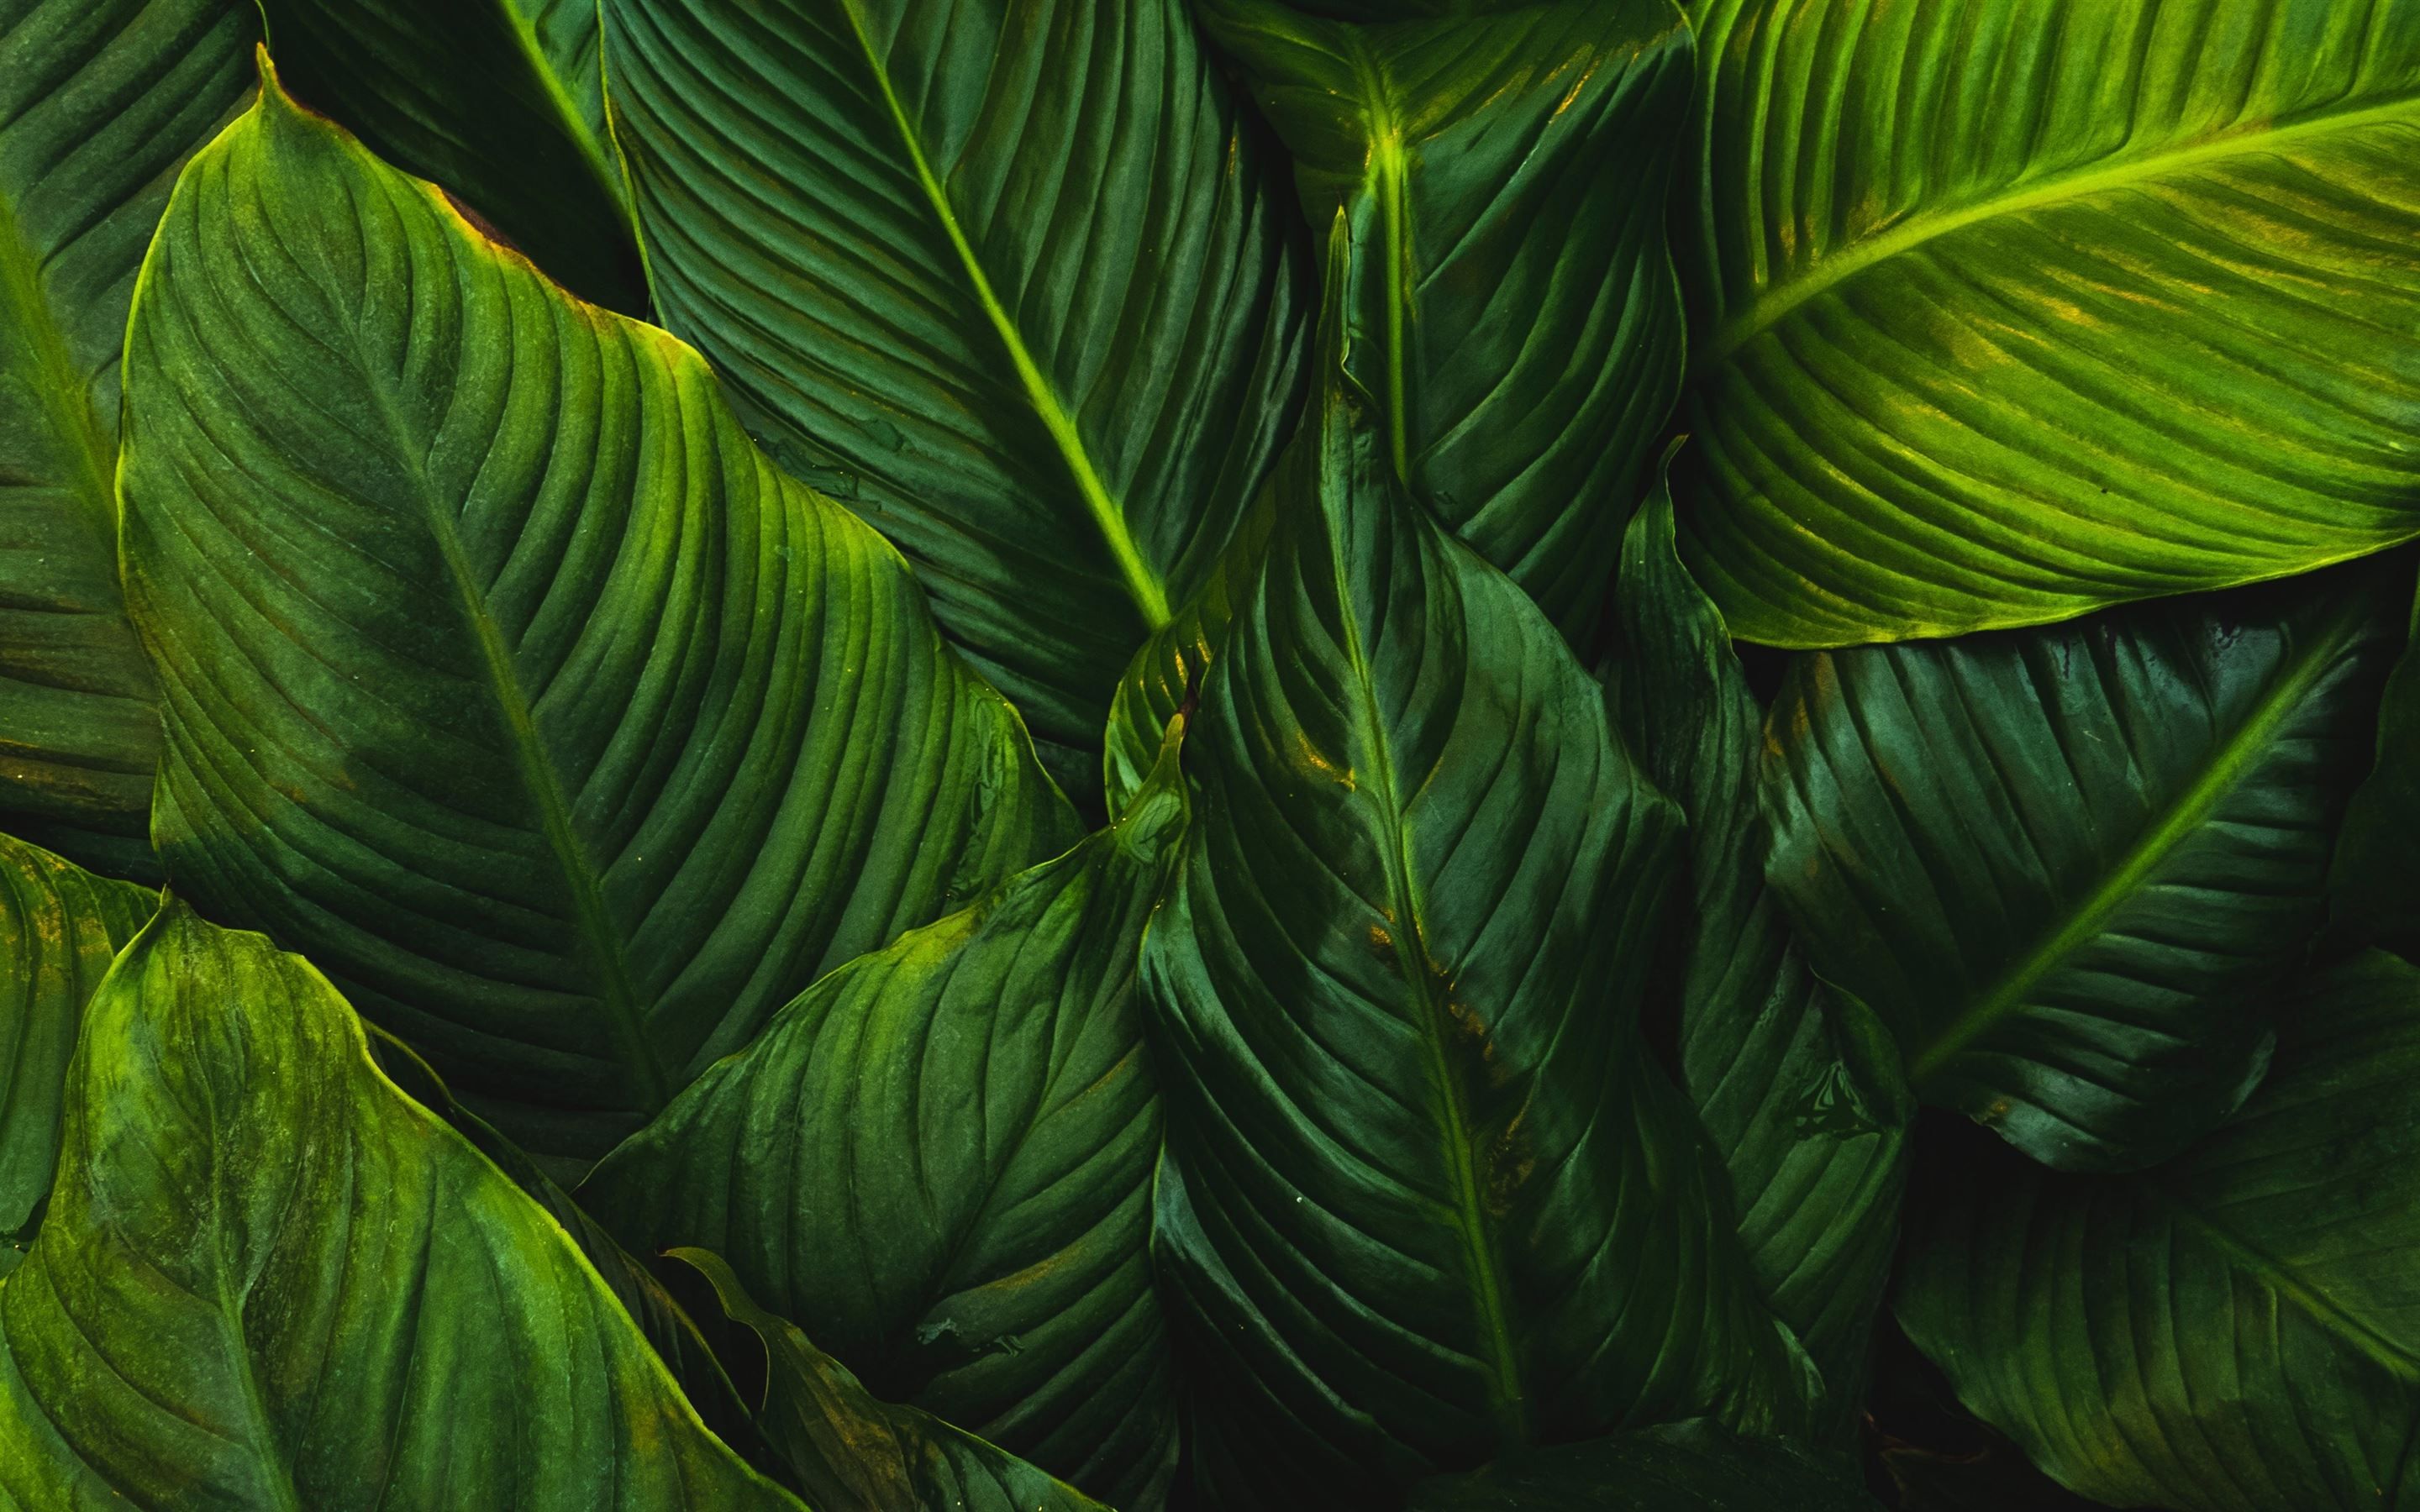 Green Leafed Plant MacBook Air Wallpaper Download